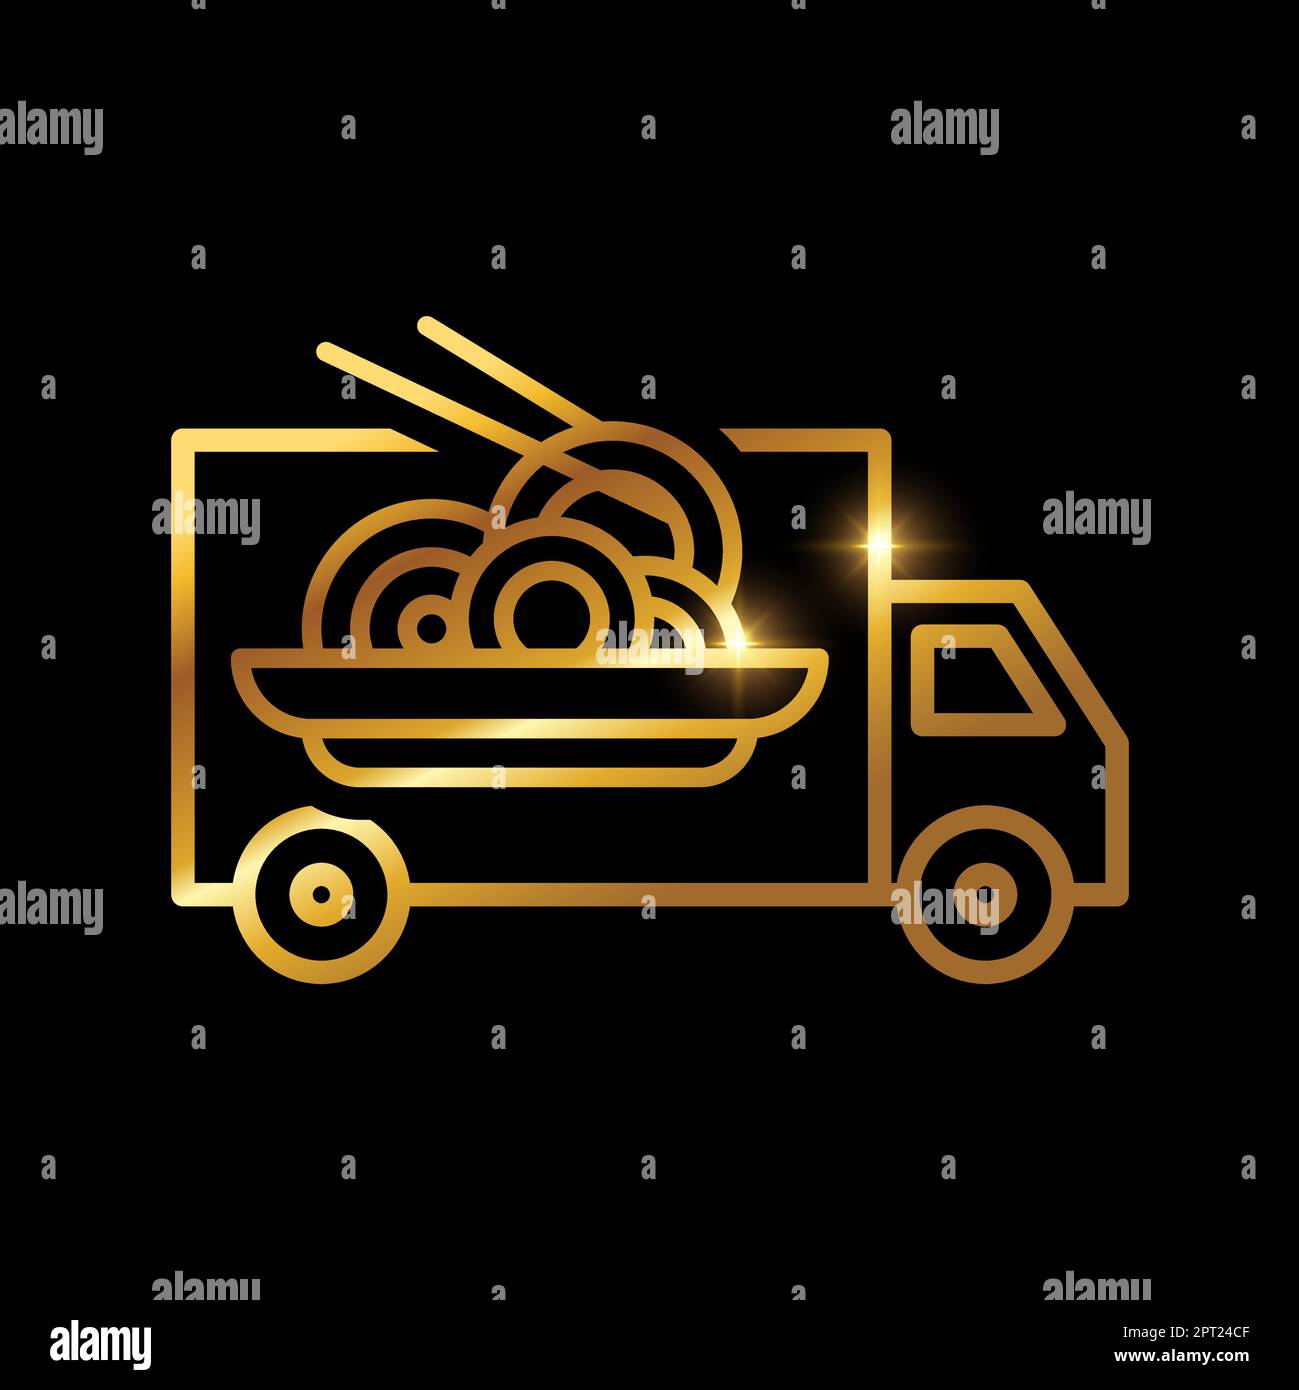 Golden Food Truck Delivery Service Icon Stock Vector